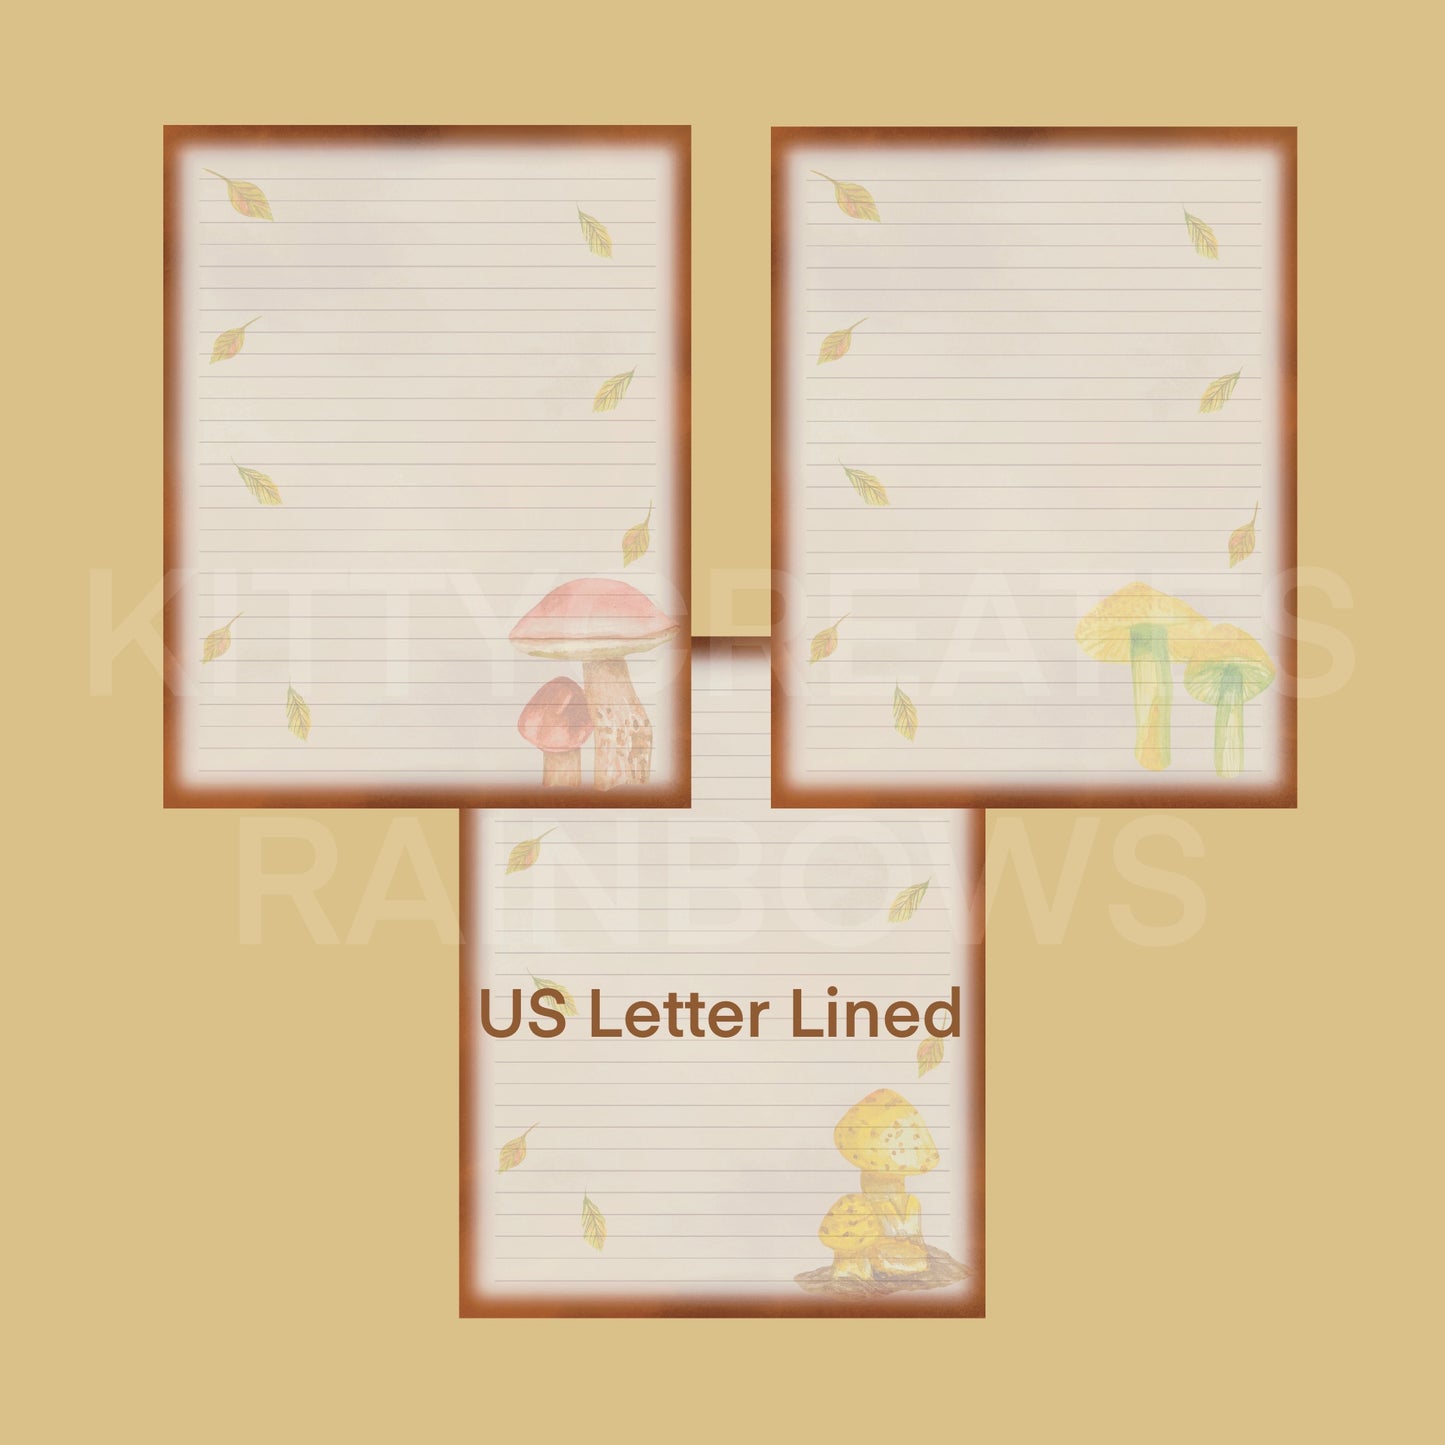 3 images of Fall Forage Mushroom Writing Papers on a light brown yellow background and a white watermark saying Kitty Creates Rainbows. Text on bottom of image also says in brown text US Letter Lined